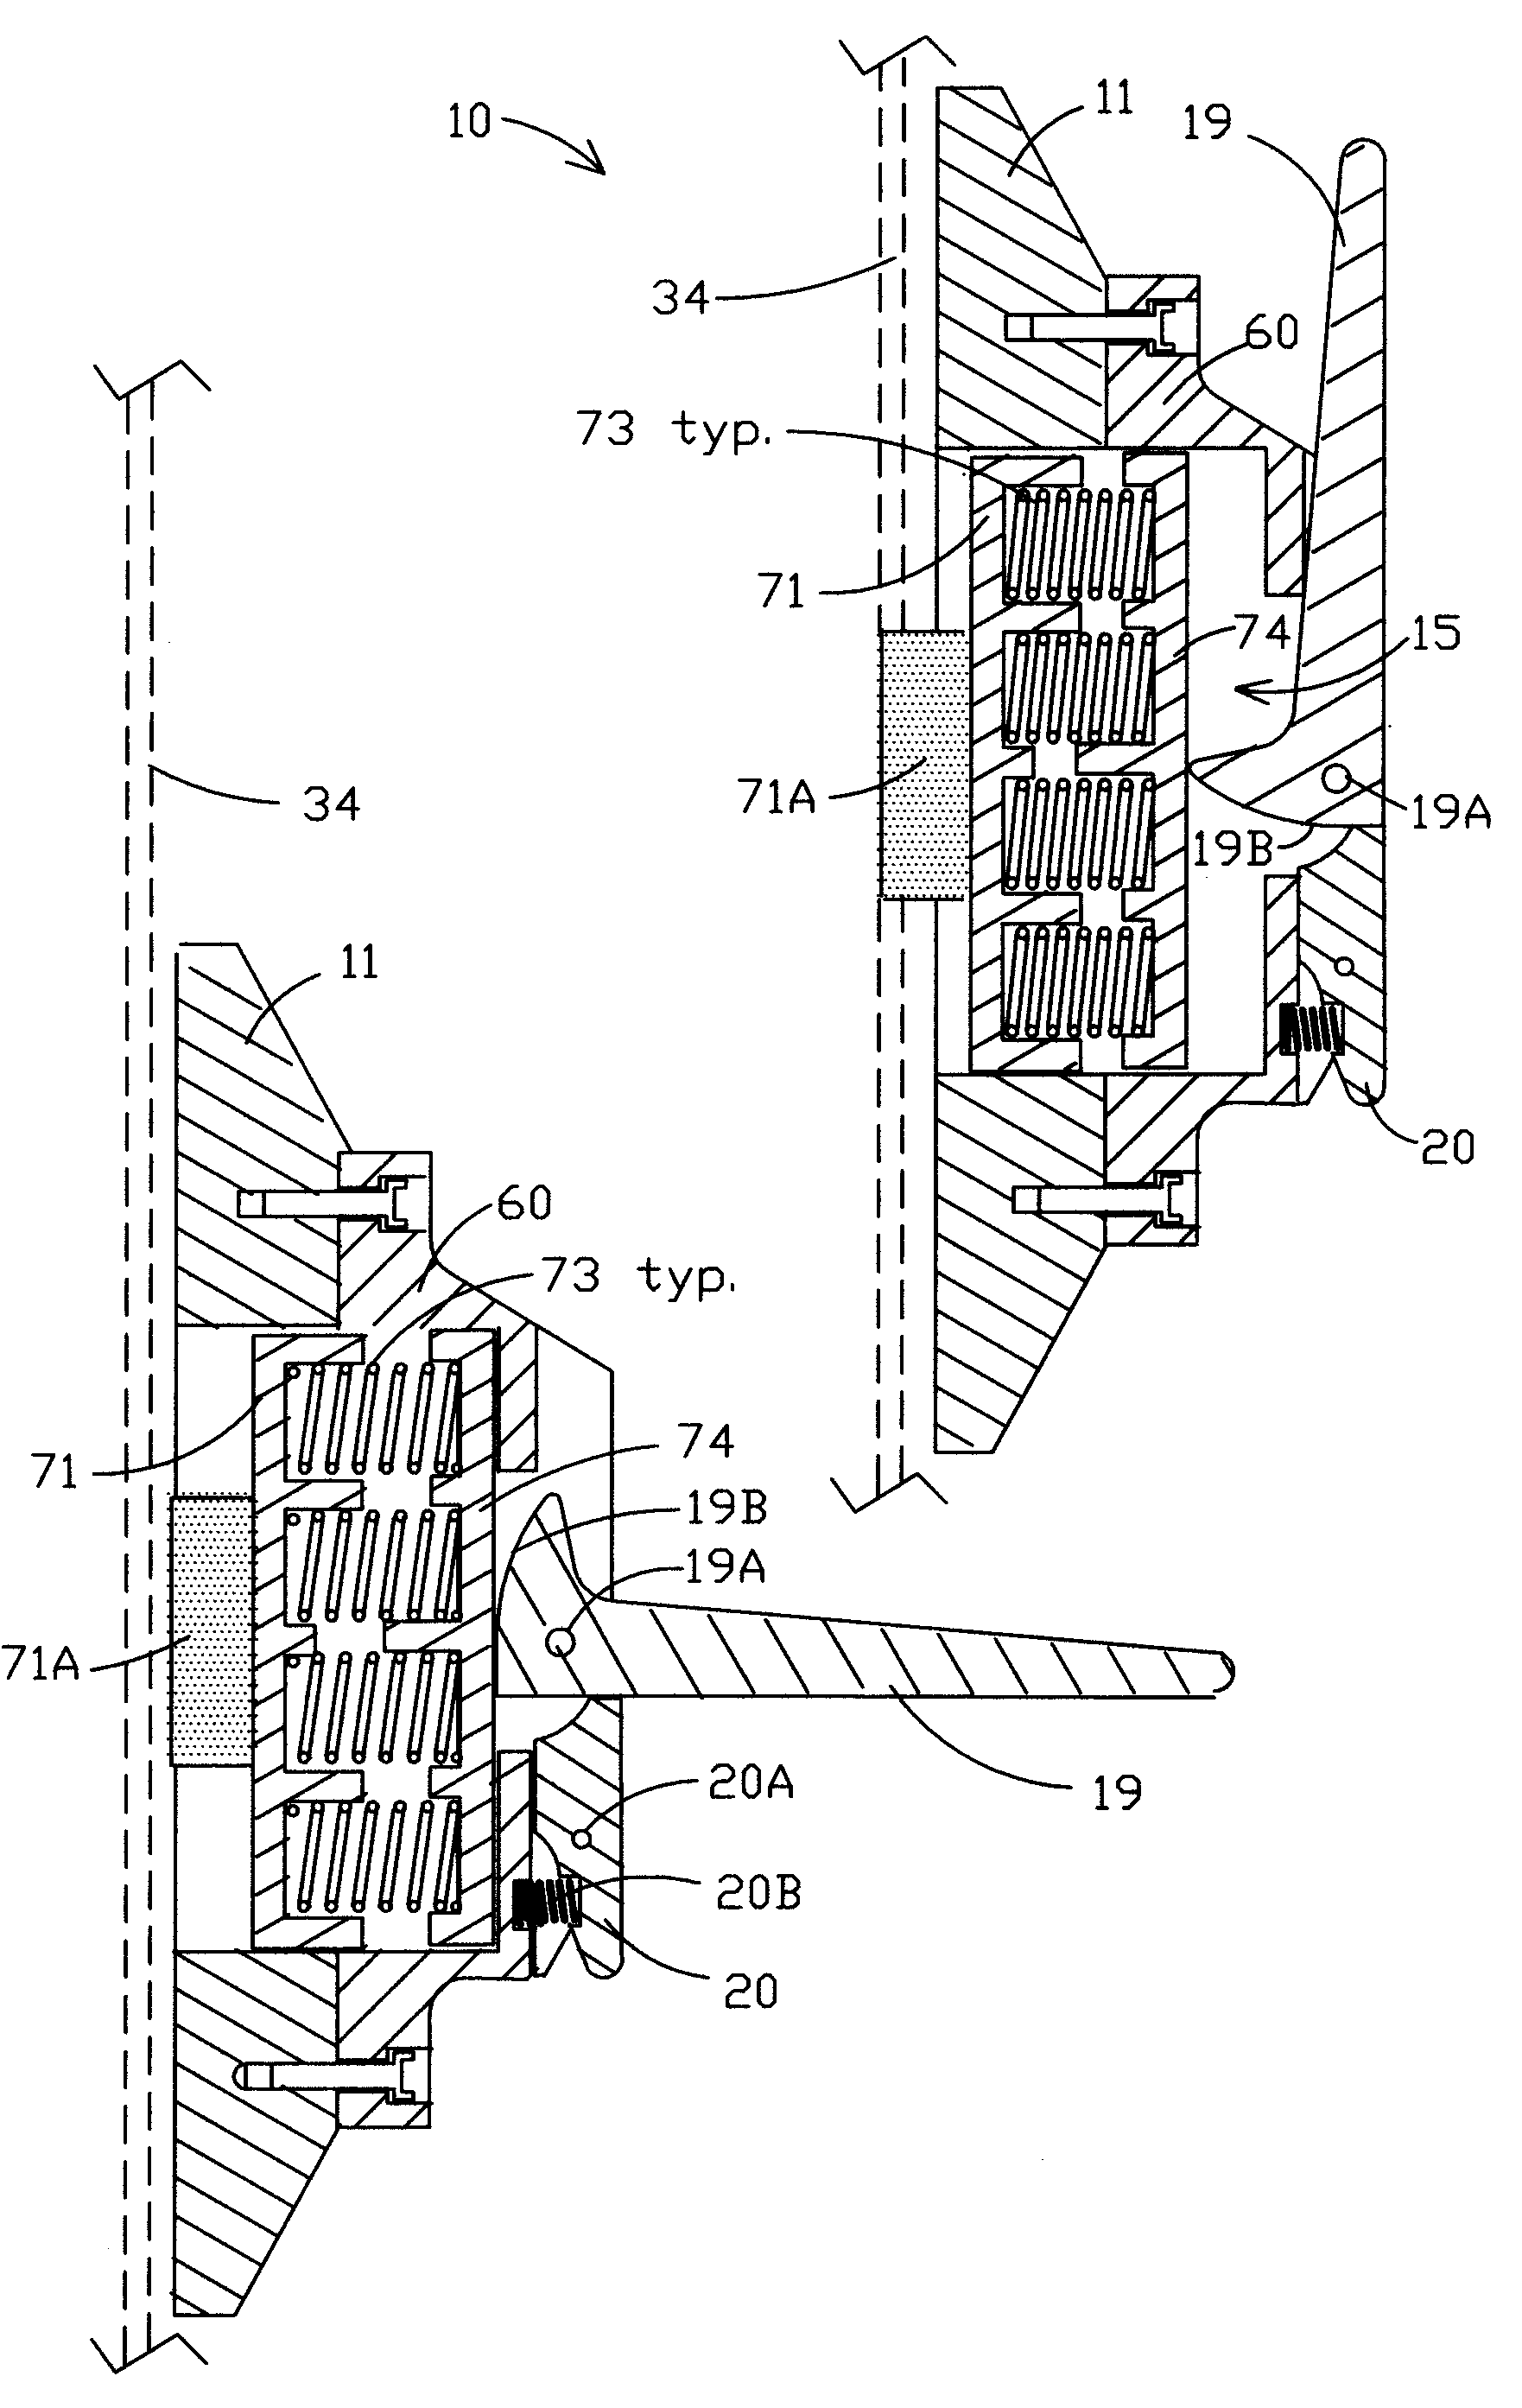 Weapons interface mounting device